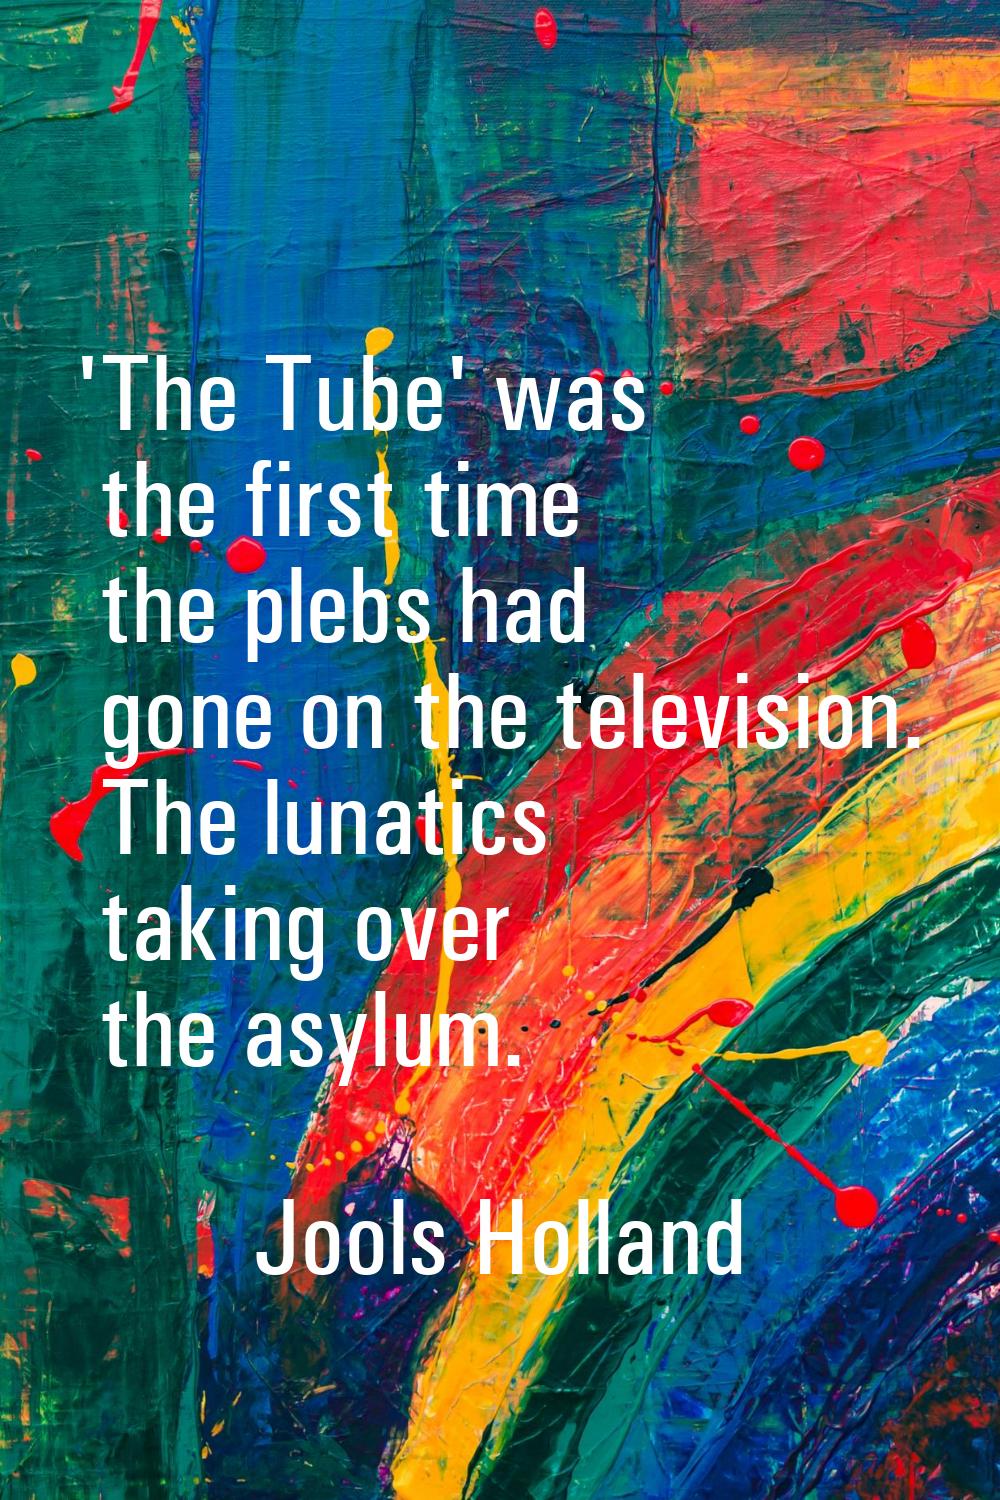 'The Tube' was the first time the plebs had gone on the television. The lunatics taking over the as